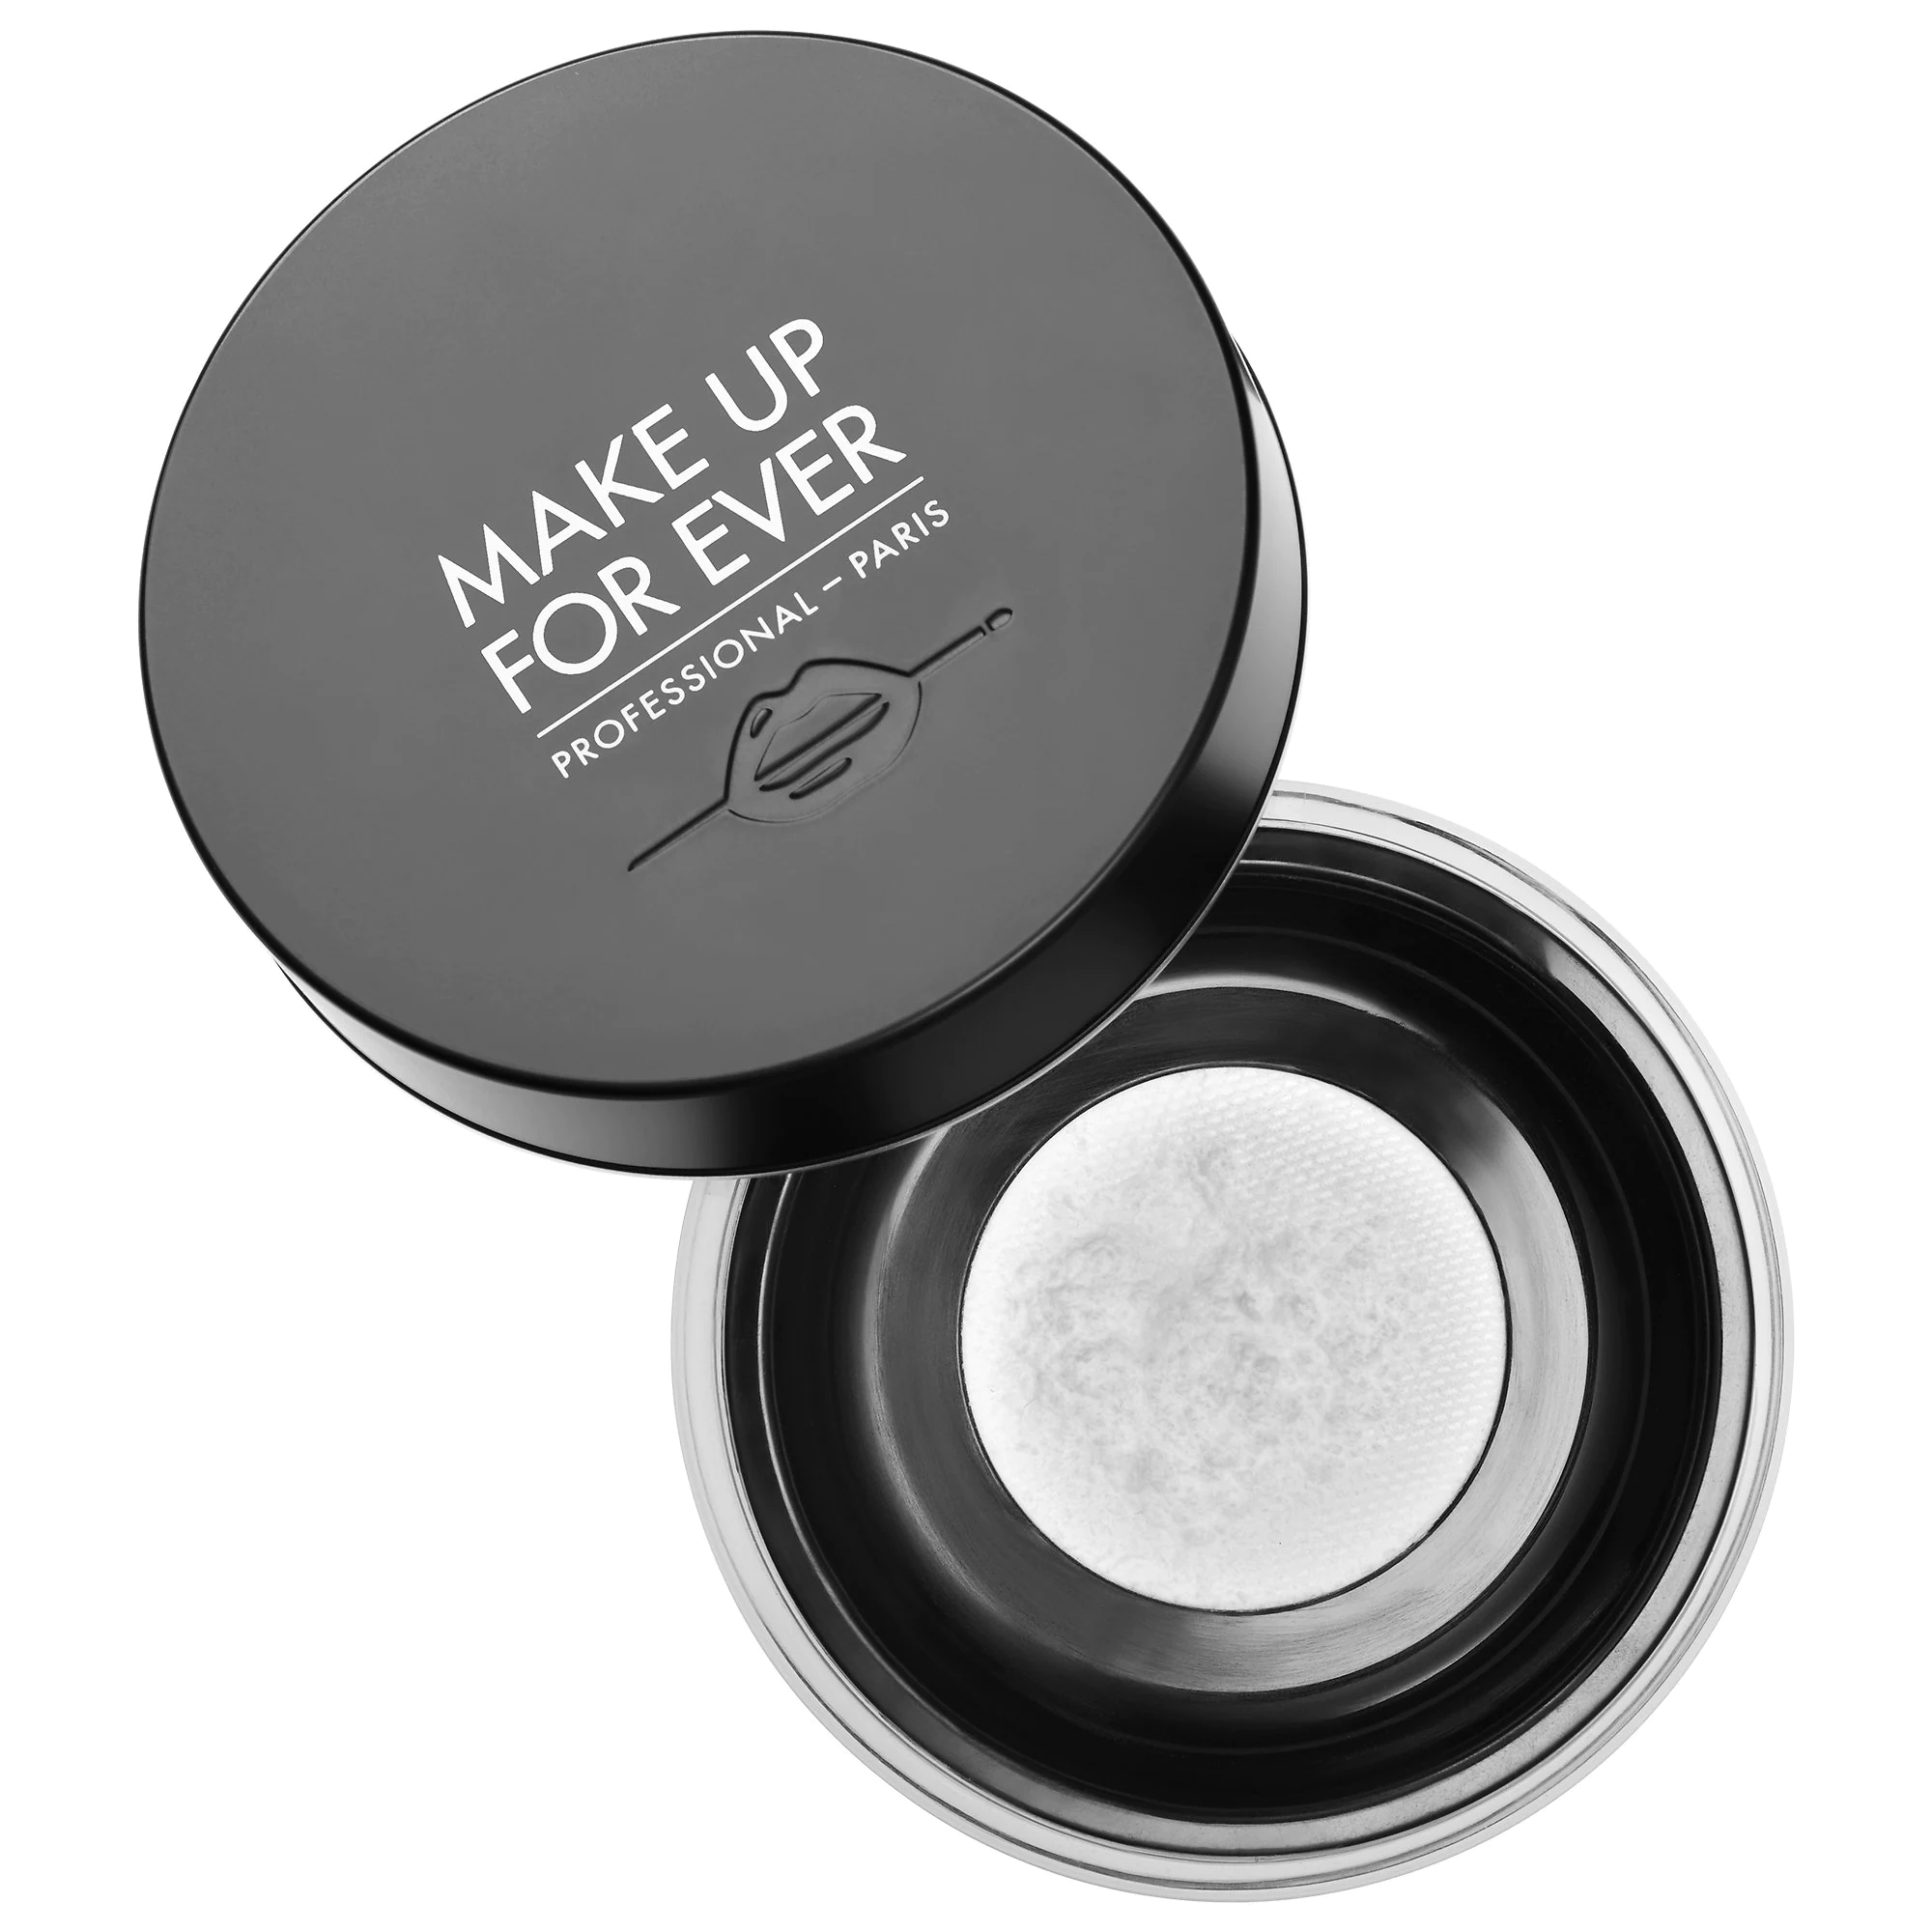 Make Up For Ever Ultra HD Loose Powder pudra pulbere pentru fixare – Review si Pareri personale